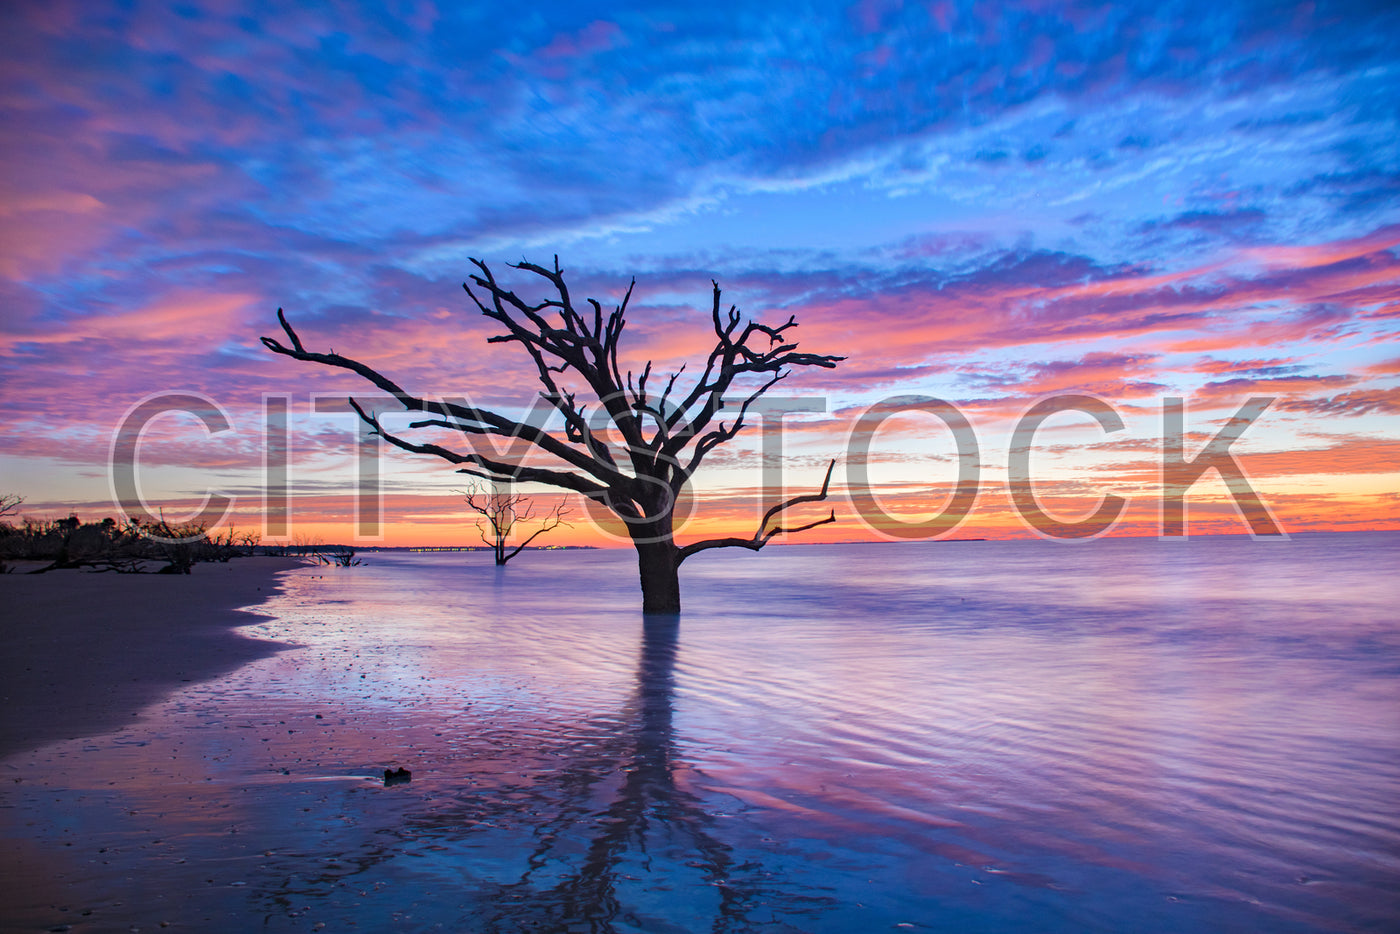 Serene sunset at Edisto Island with a silhouetted tree